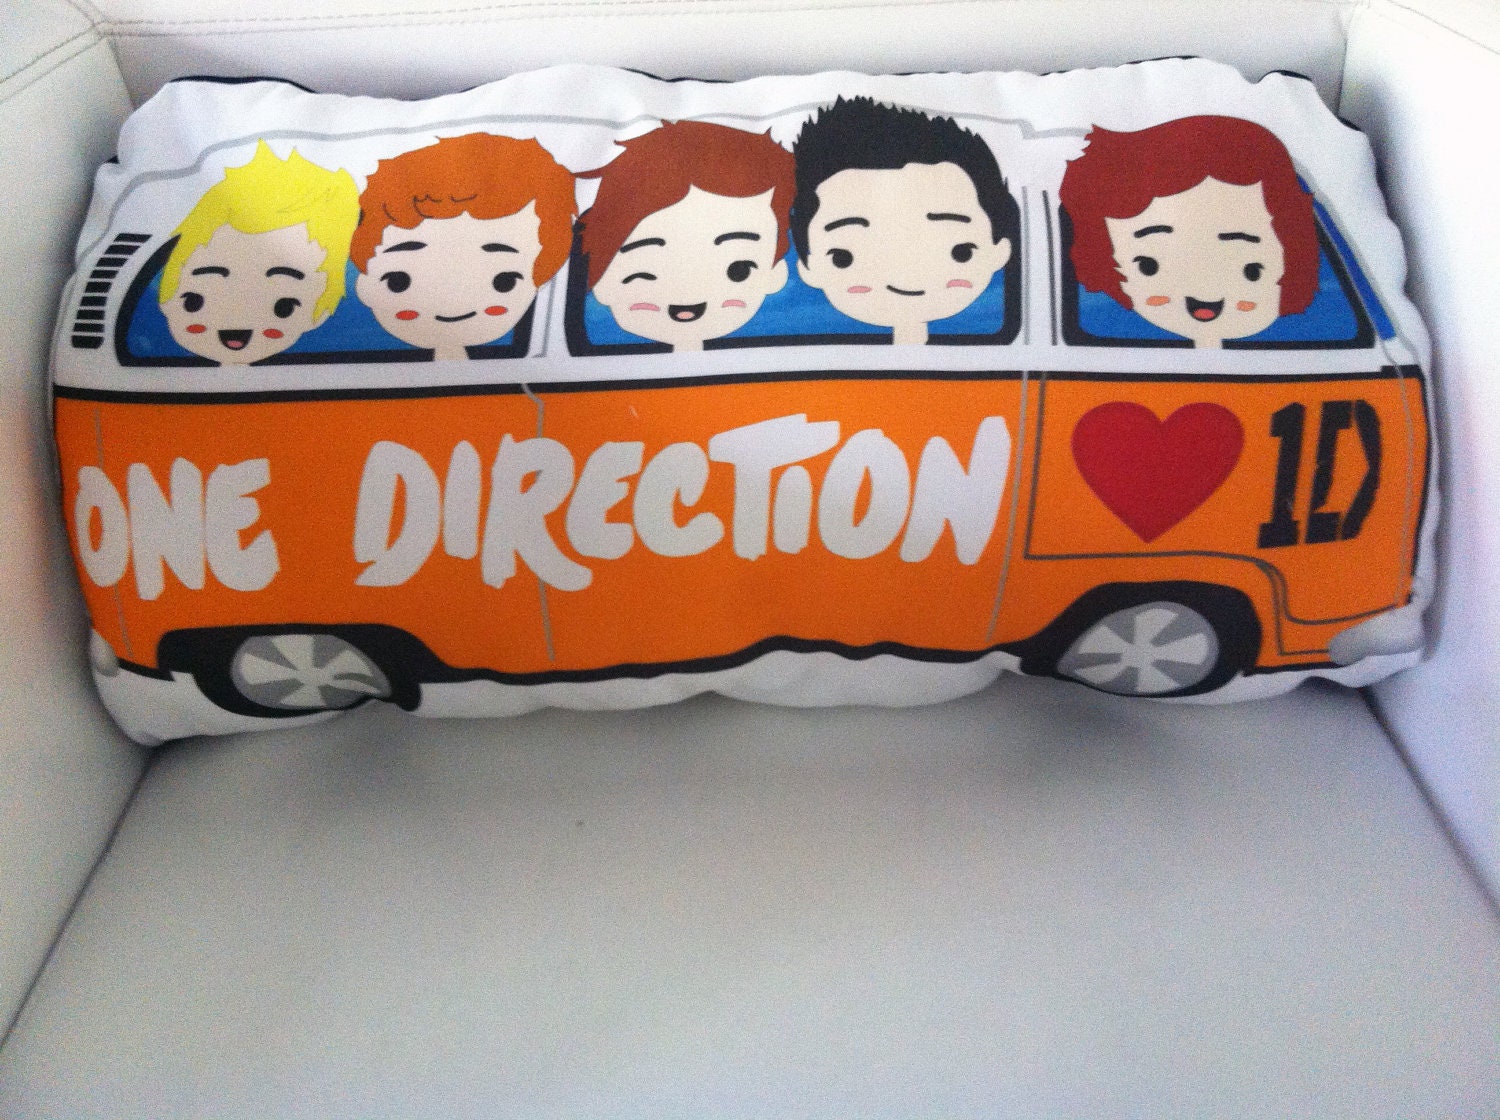 Exclusive One Direction VW Bus Throw Pillow Cover. 1D Shaped Logo Pillow.  Love One Direction